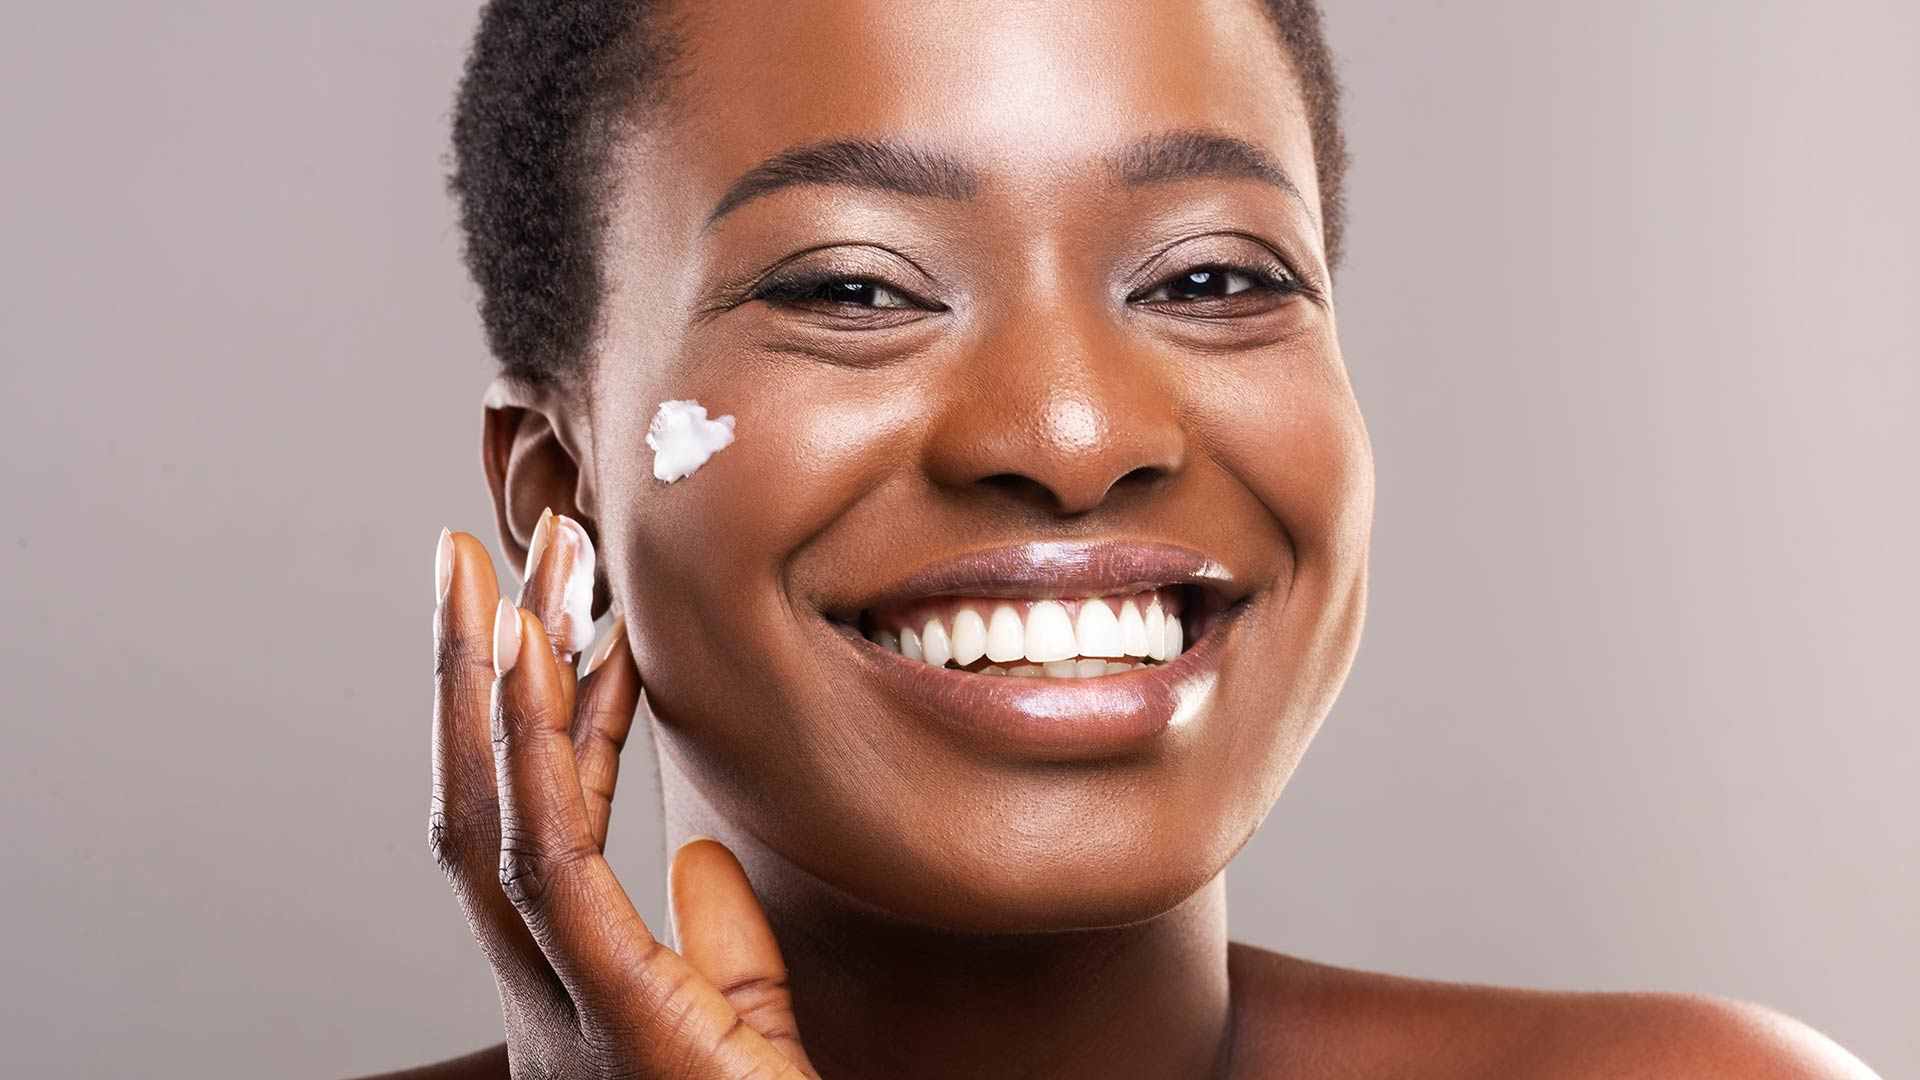 Natural Radiance Unveiled: 5 Daily Practices to Cultivate Bare-Faced Beauty